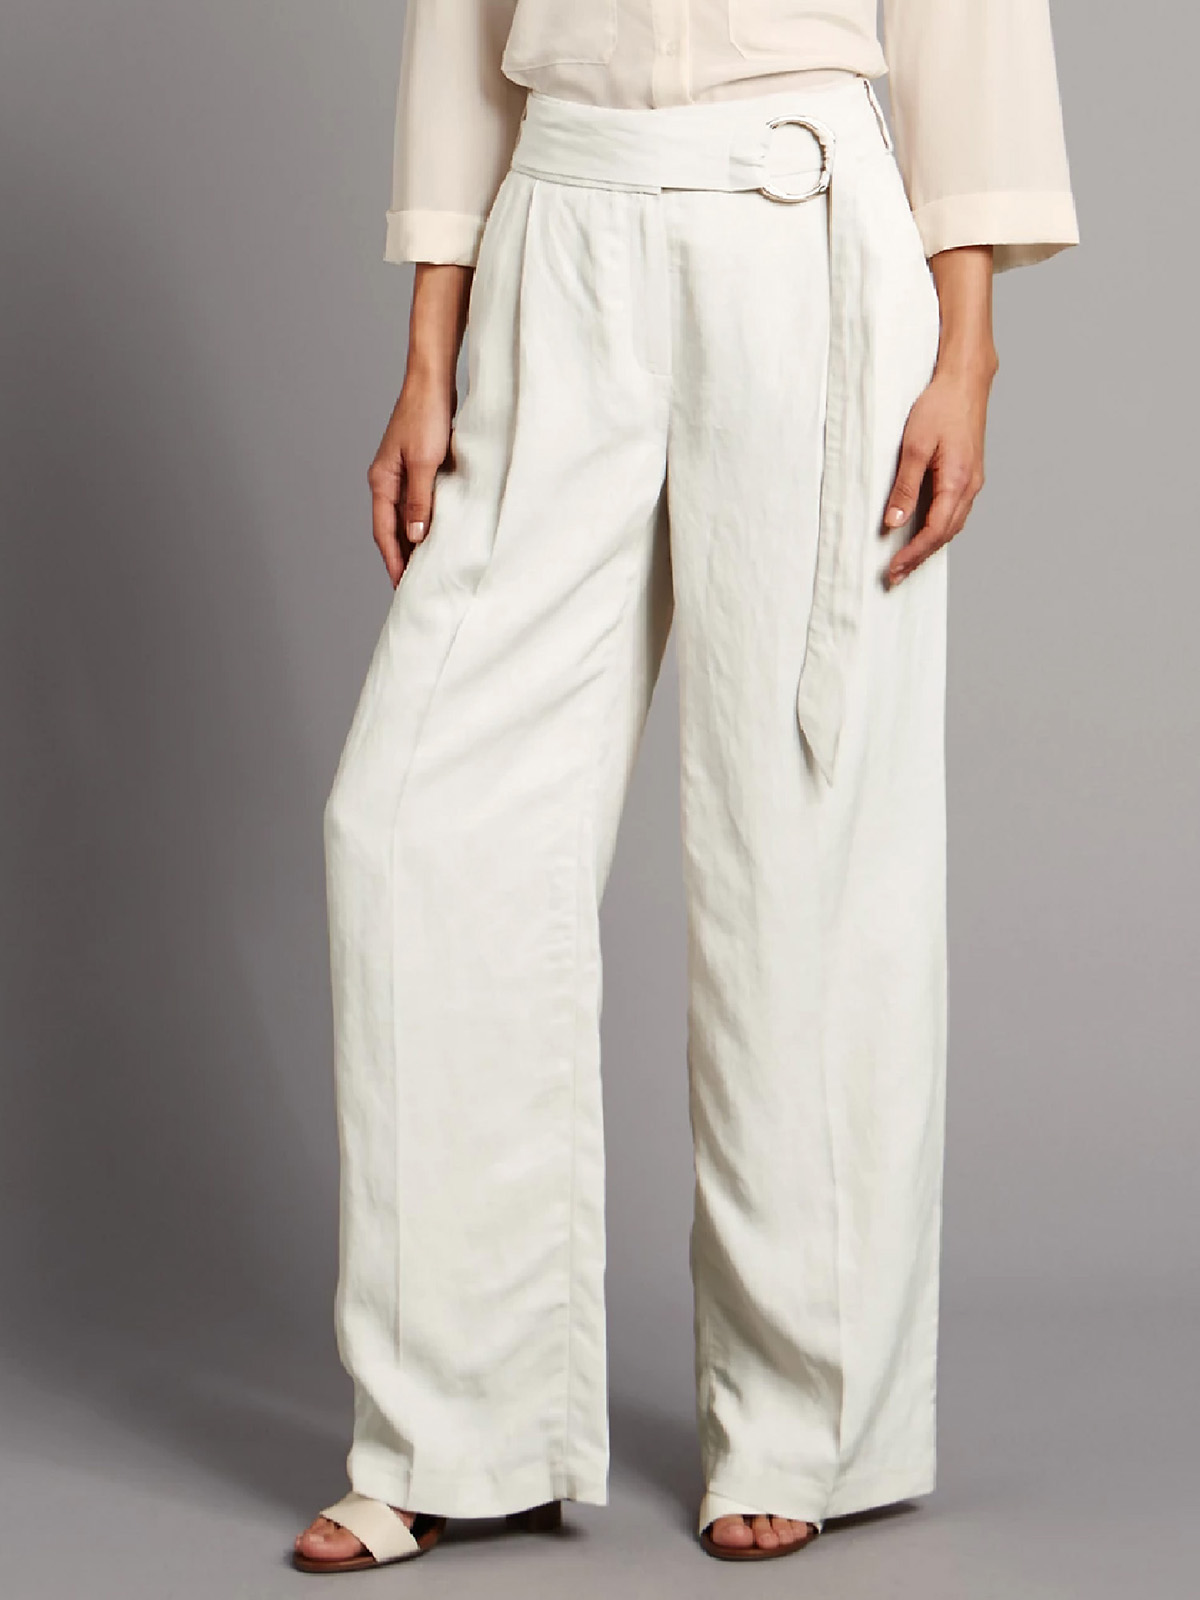 Marks and Spencer - - M&5 NEUTRAL Linen Blend Wide Leg Belted Trousers ...